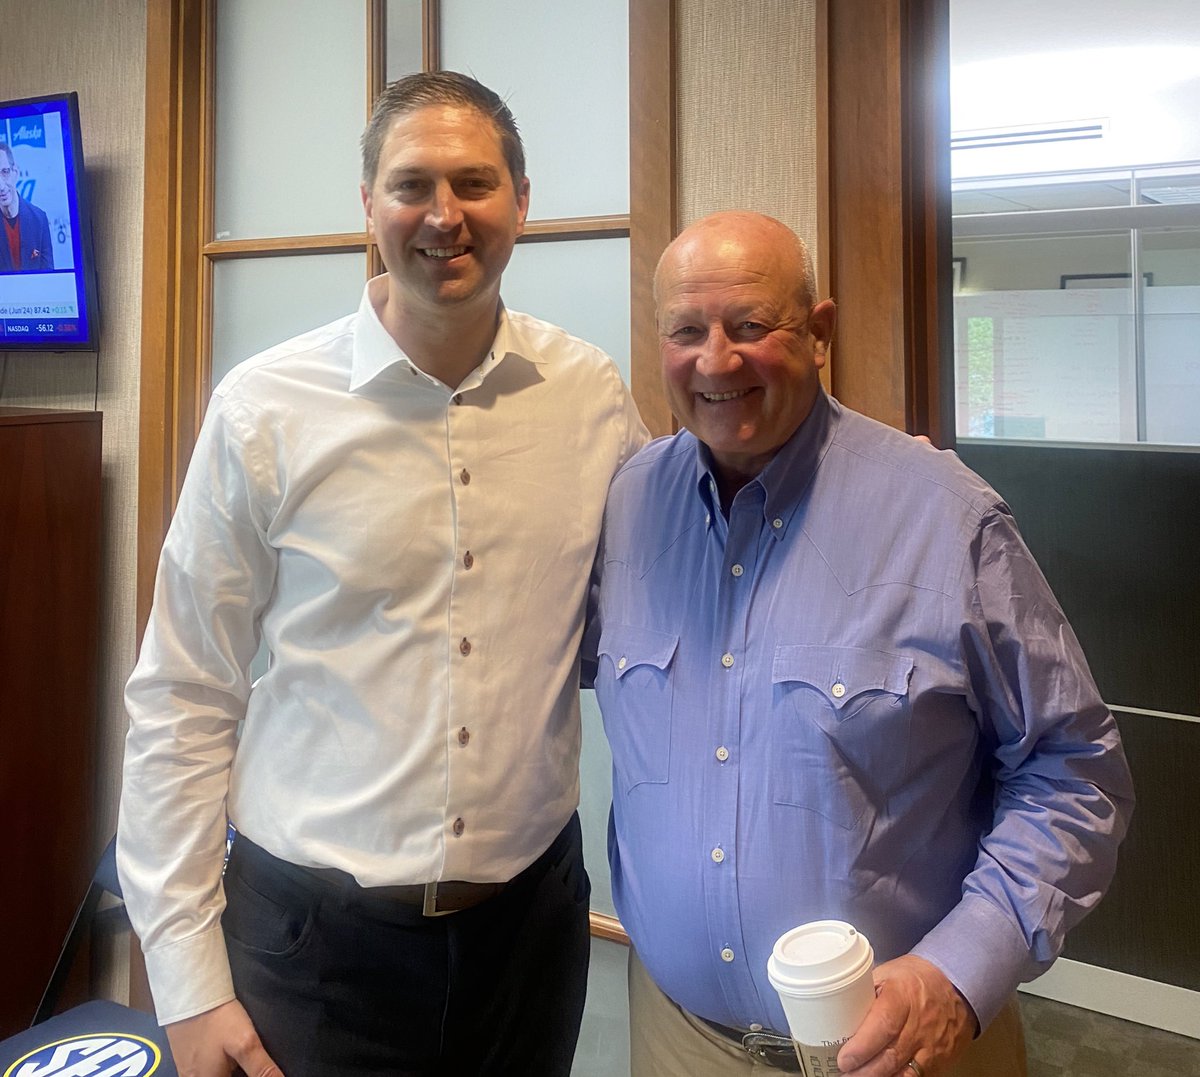 Thankful to reconnect w/Craig Bohl (@CoachCBohl) at @SEC HQ. I was his scout-team QB at Nebraska. Coach Bohl built @NDSUfootball into a powerhouse, was head coach for @wyo_football and now leads @WeAreAFCA. Along the way, he recruited/developed NFL QBs, Josh Allen & Carson Wentz.